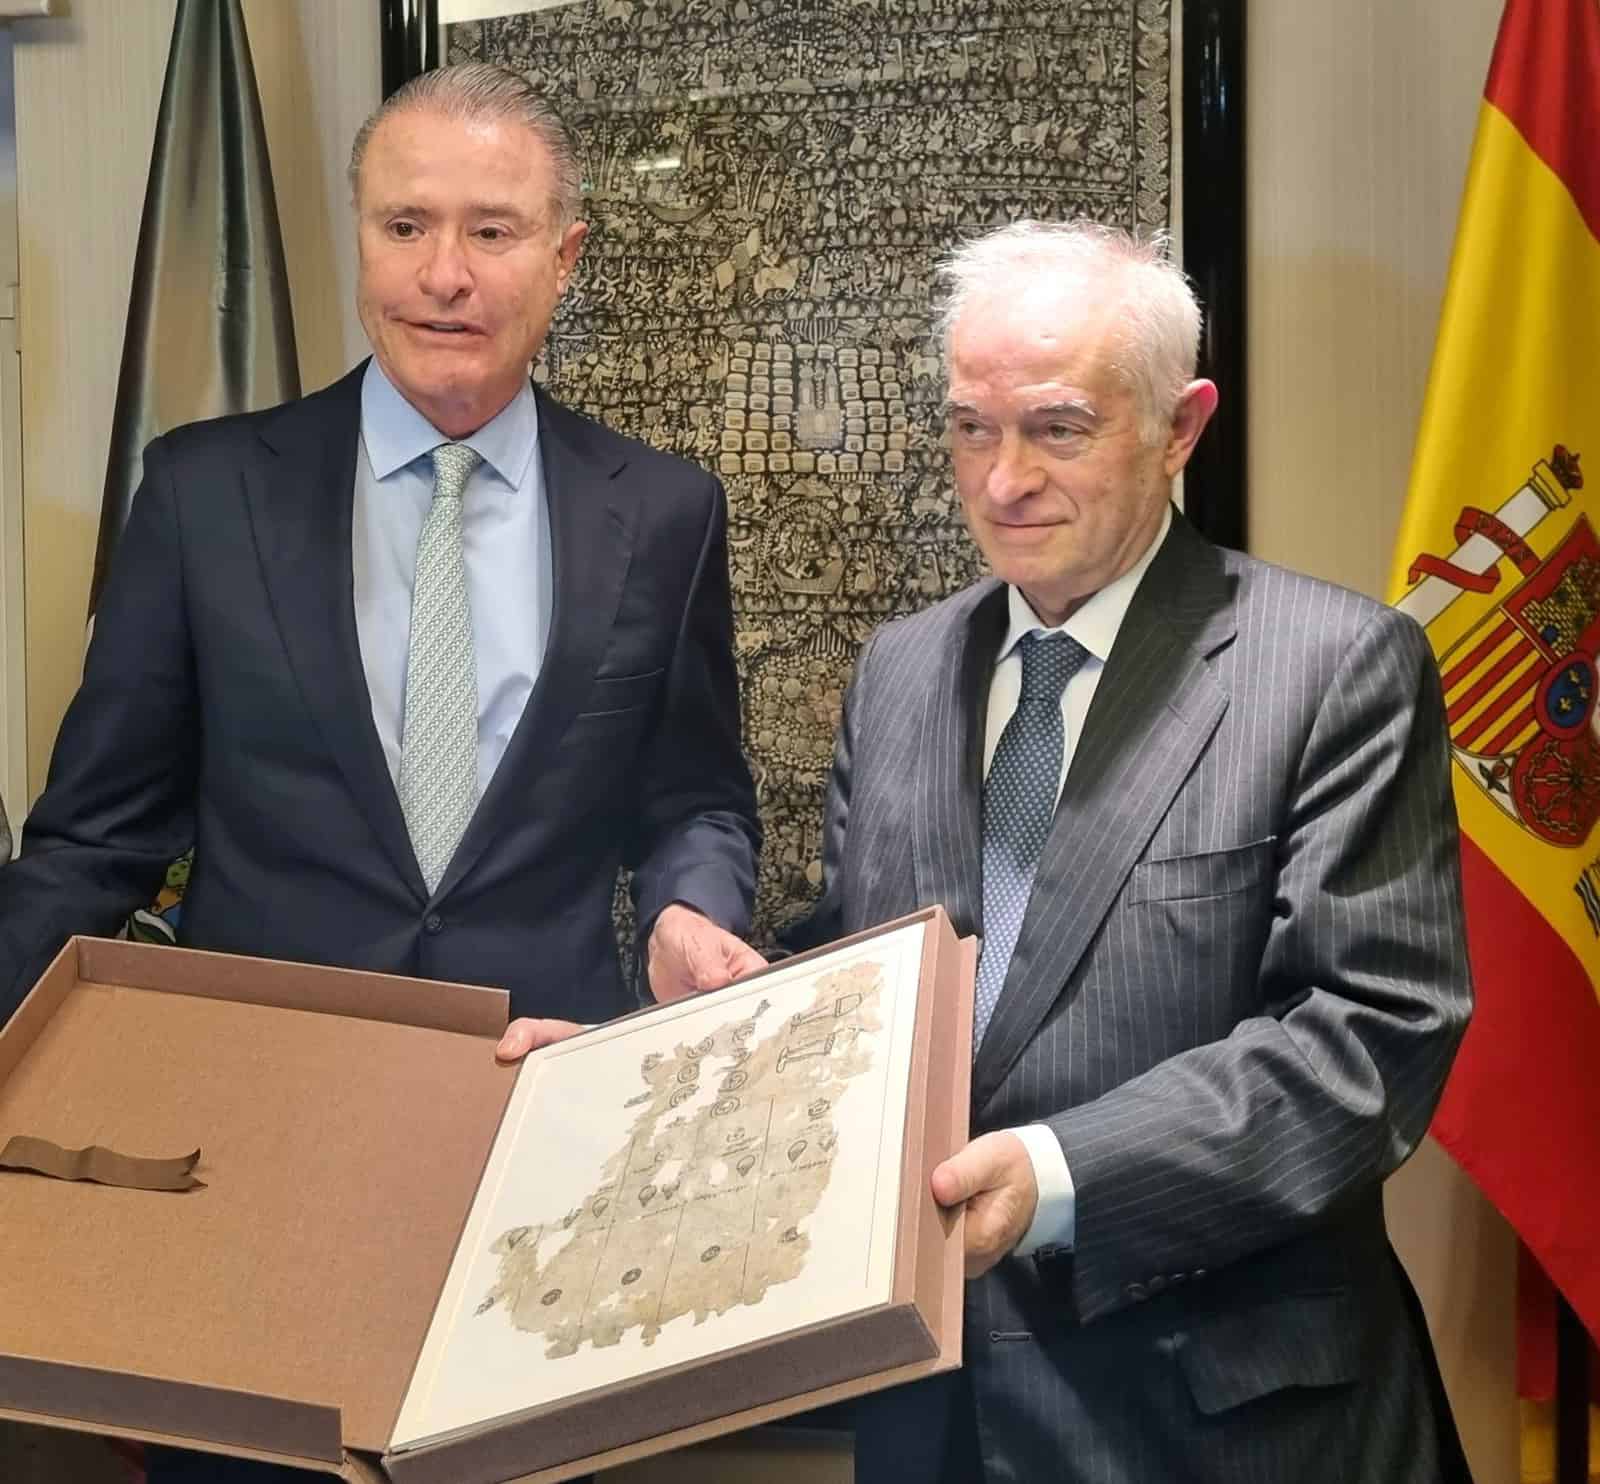 Two men in suits hold a binder displaying an old document, standing in front of a Spanish flag.